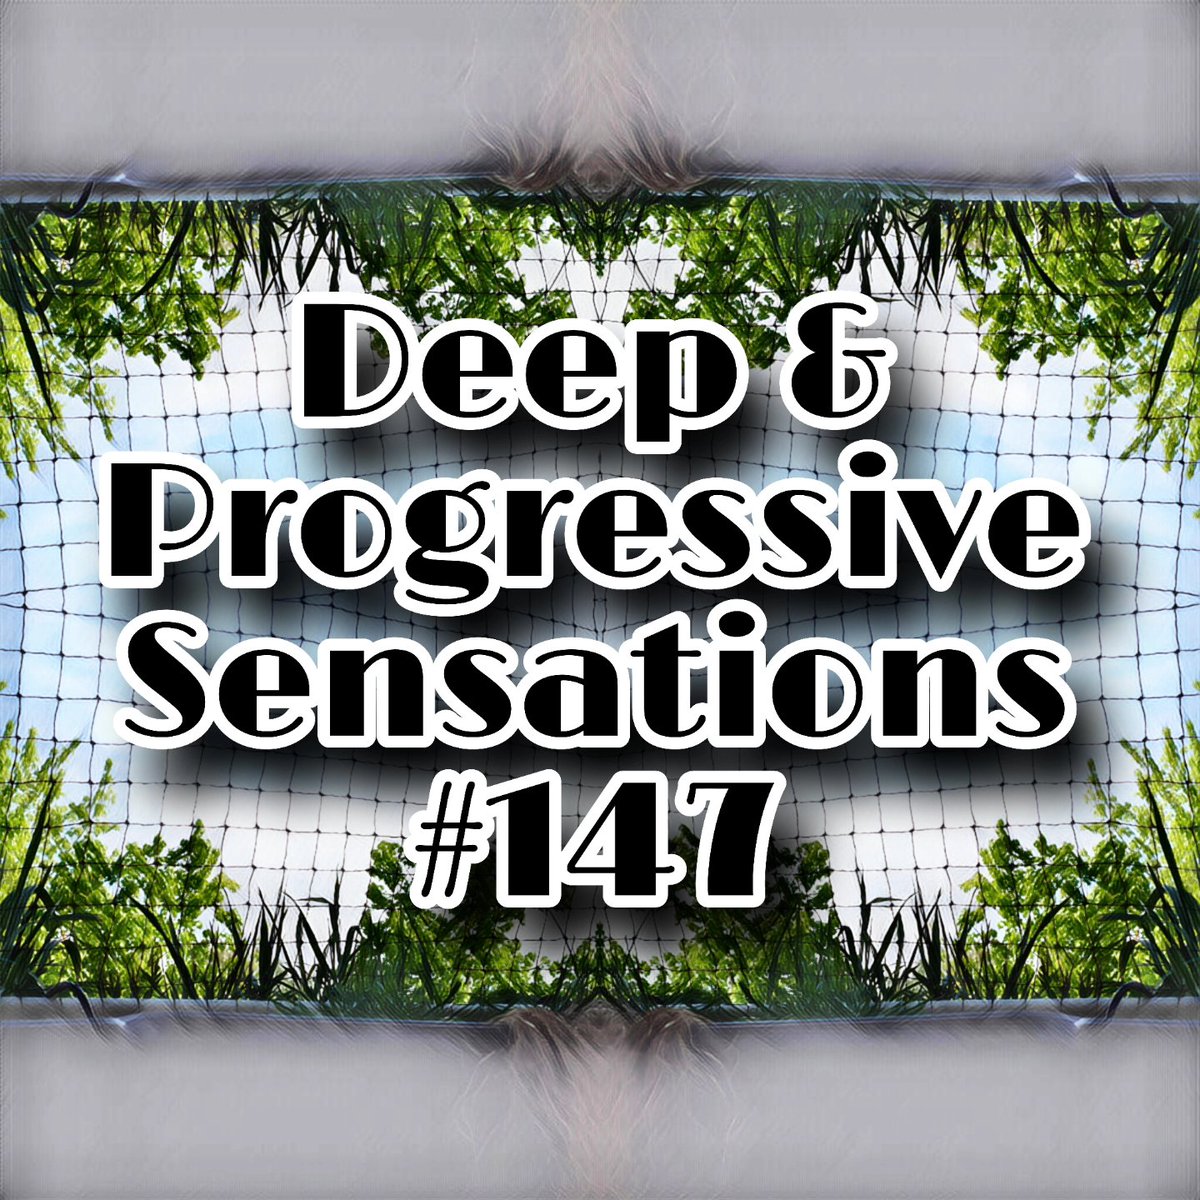 Soulful Afro Beats goes into Progressive meeting Melodic Techno. Expect the unexpected. A hot ride with Sensations only. 

soundcloud.com/beornvith/deep…

#Progressive #Deep #ProgressiveHouse #housemusic #electrohouse #Dance #Dj #Mixtape #Djmix #MelodicTechno #Beatport #Afro #Deephouse